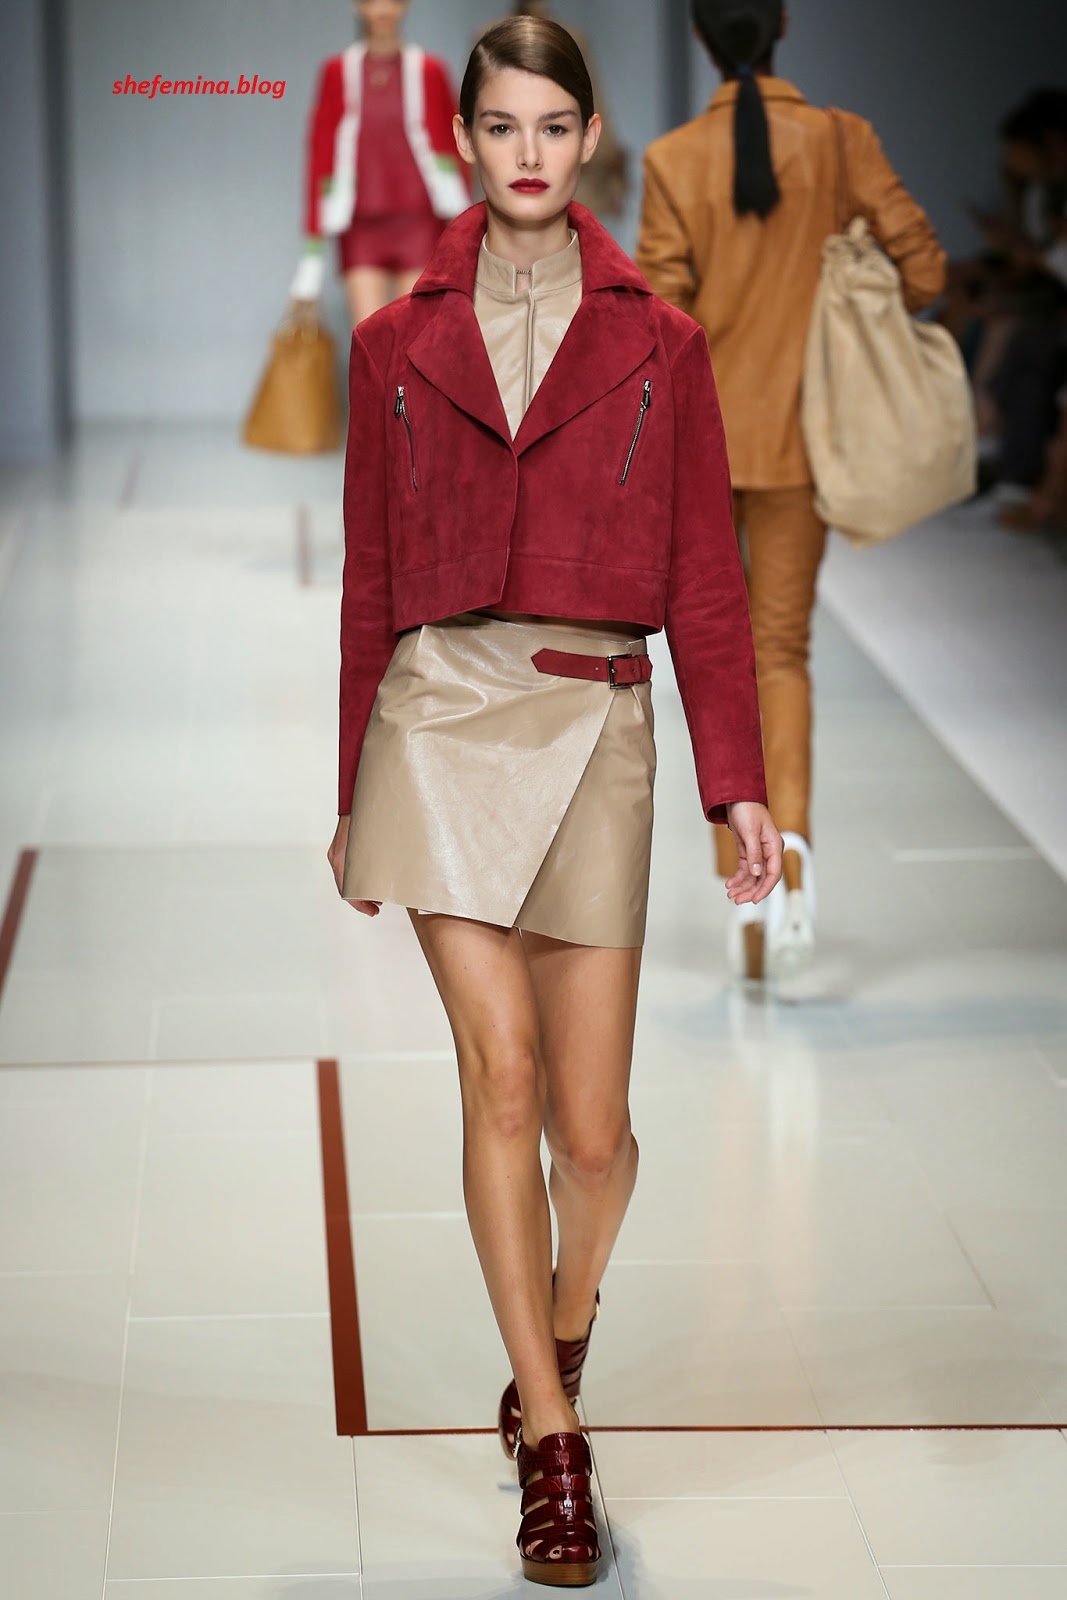 Trussardi Spring 2015 Ready-to-Wear Dresses Collation at Fashioh Show ...